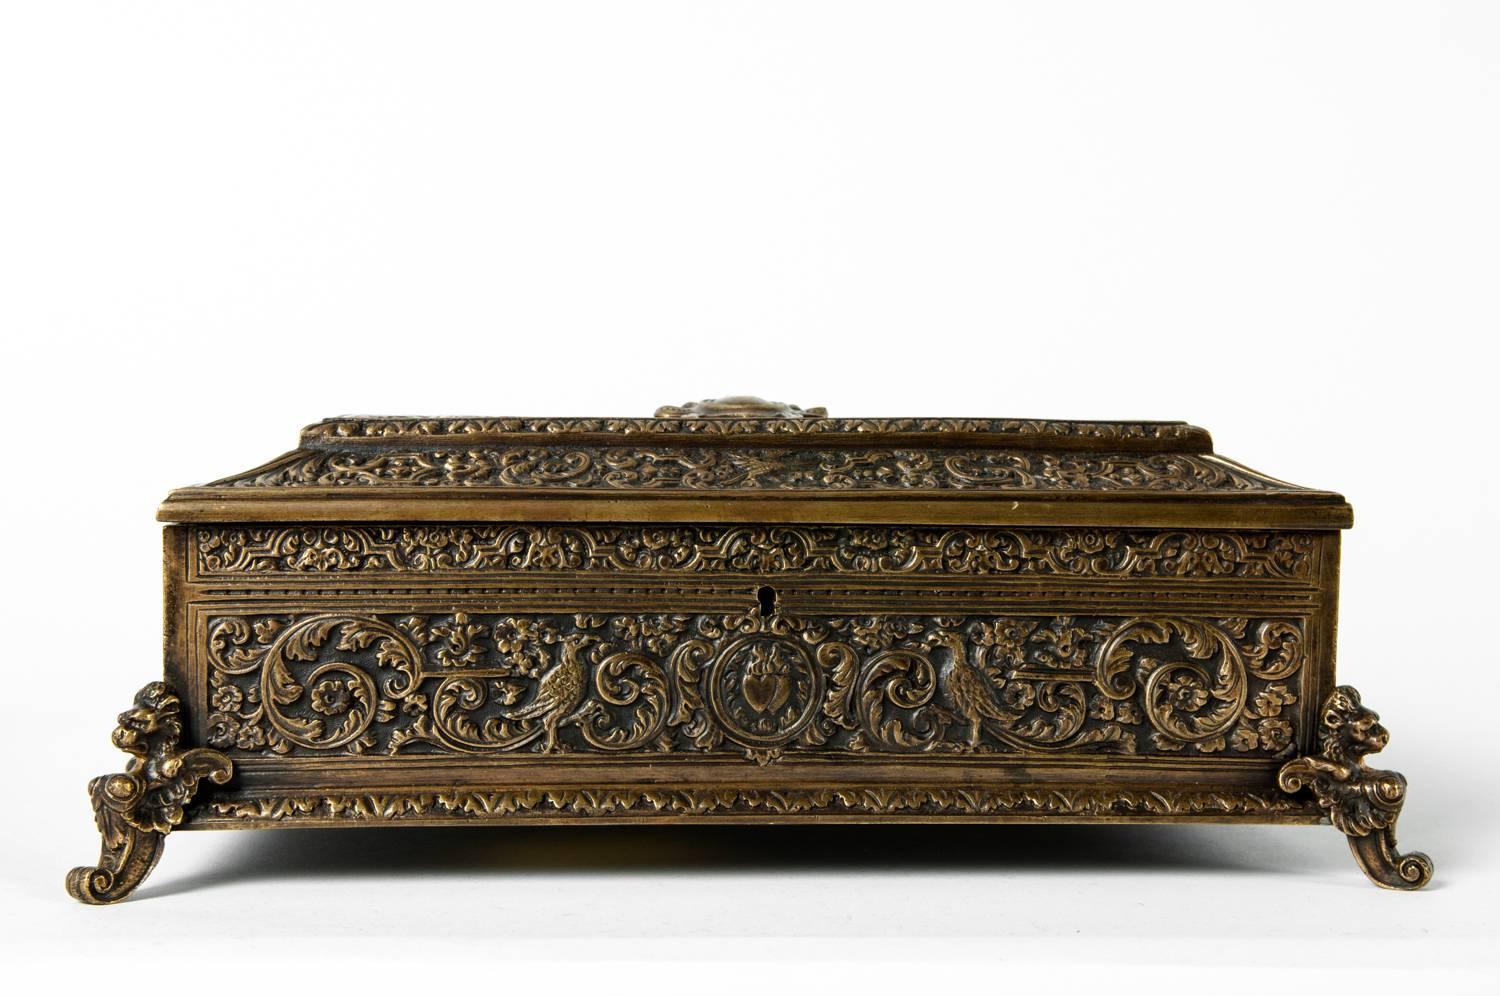 Antique French brass embossed detailing decorative footed box with crest decorative hand chase work and resting on four lions heads. The box measure 11 inches long x 9 inches width x 4 inches high.